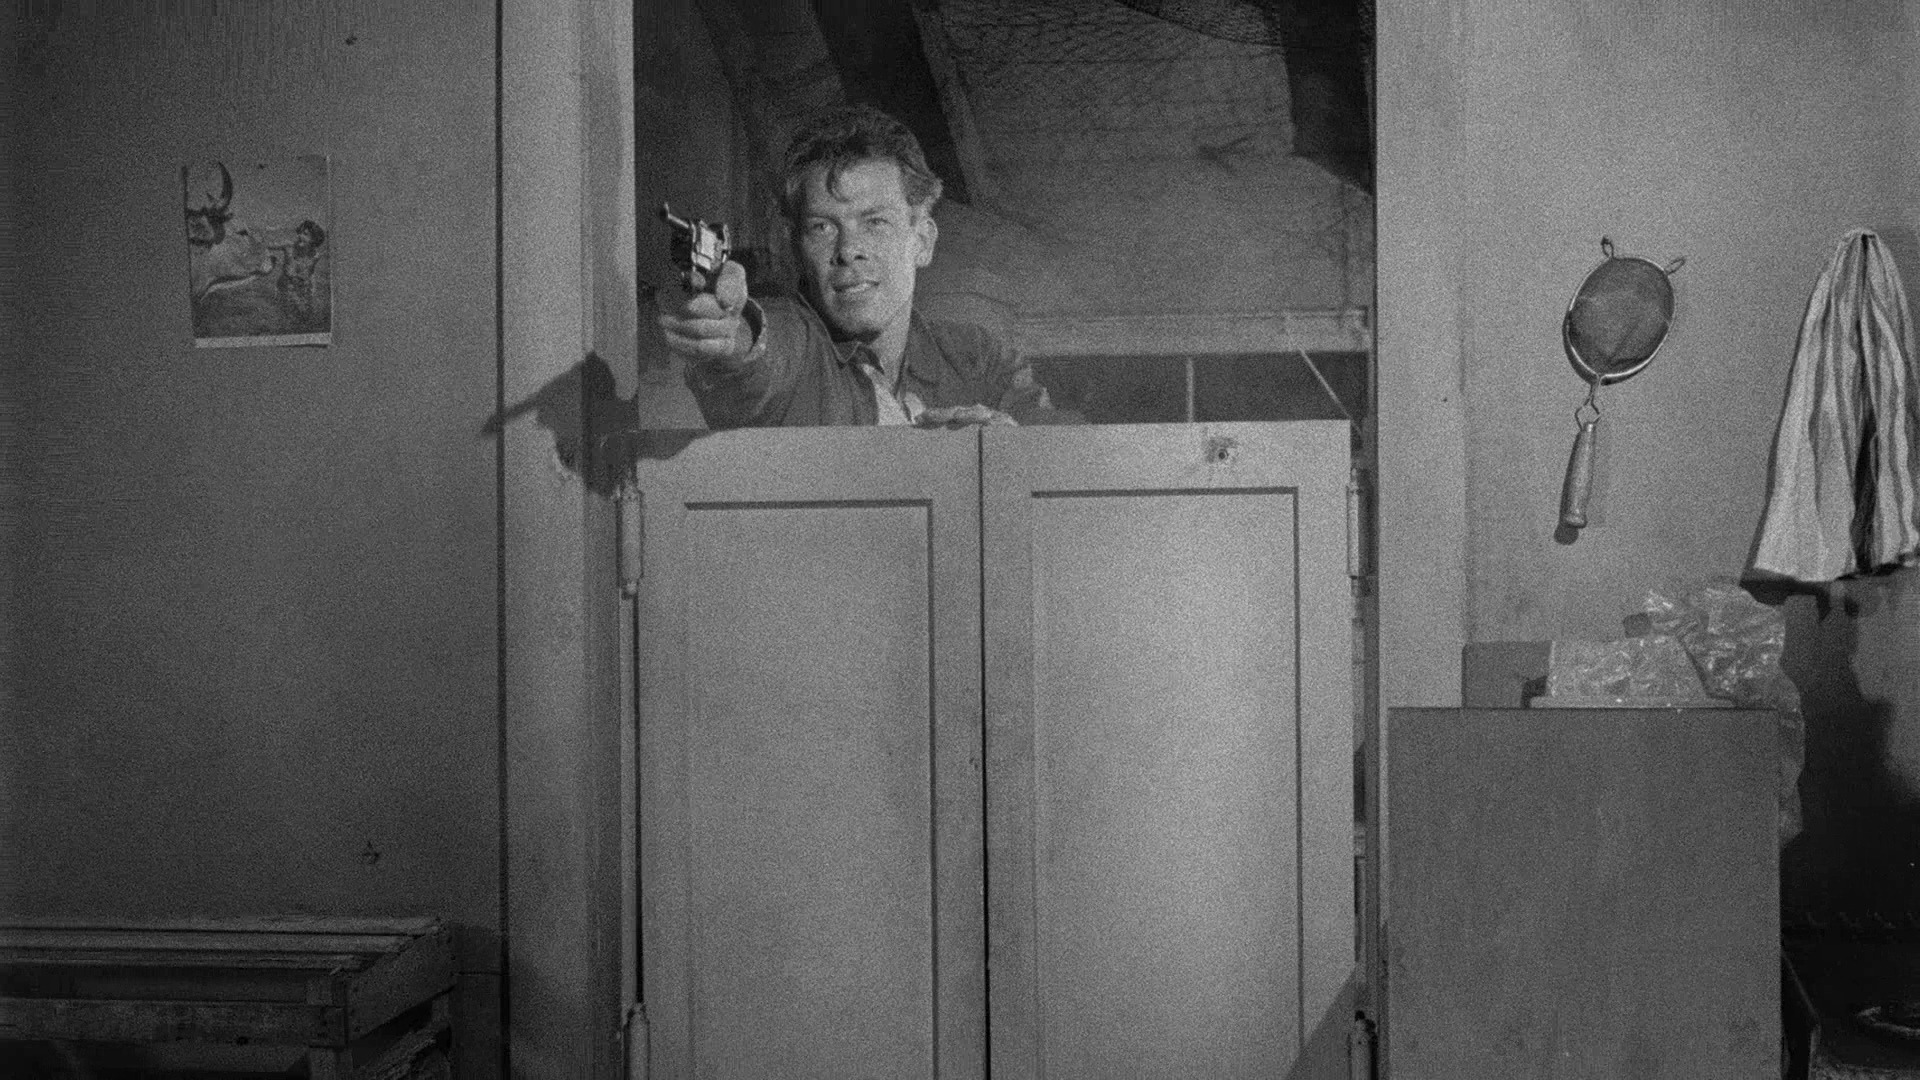 Shack Out on 101 (1955) Screenshot 5 